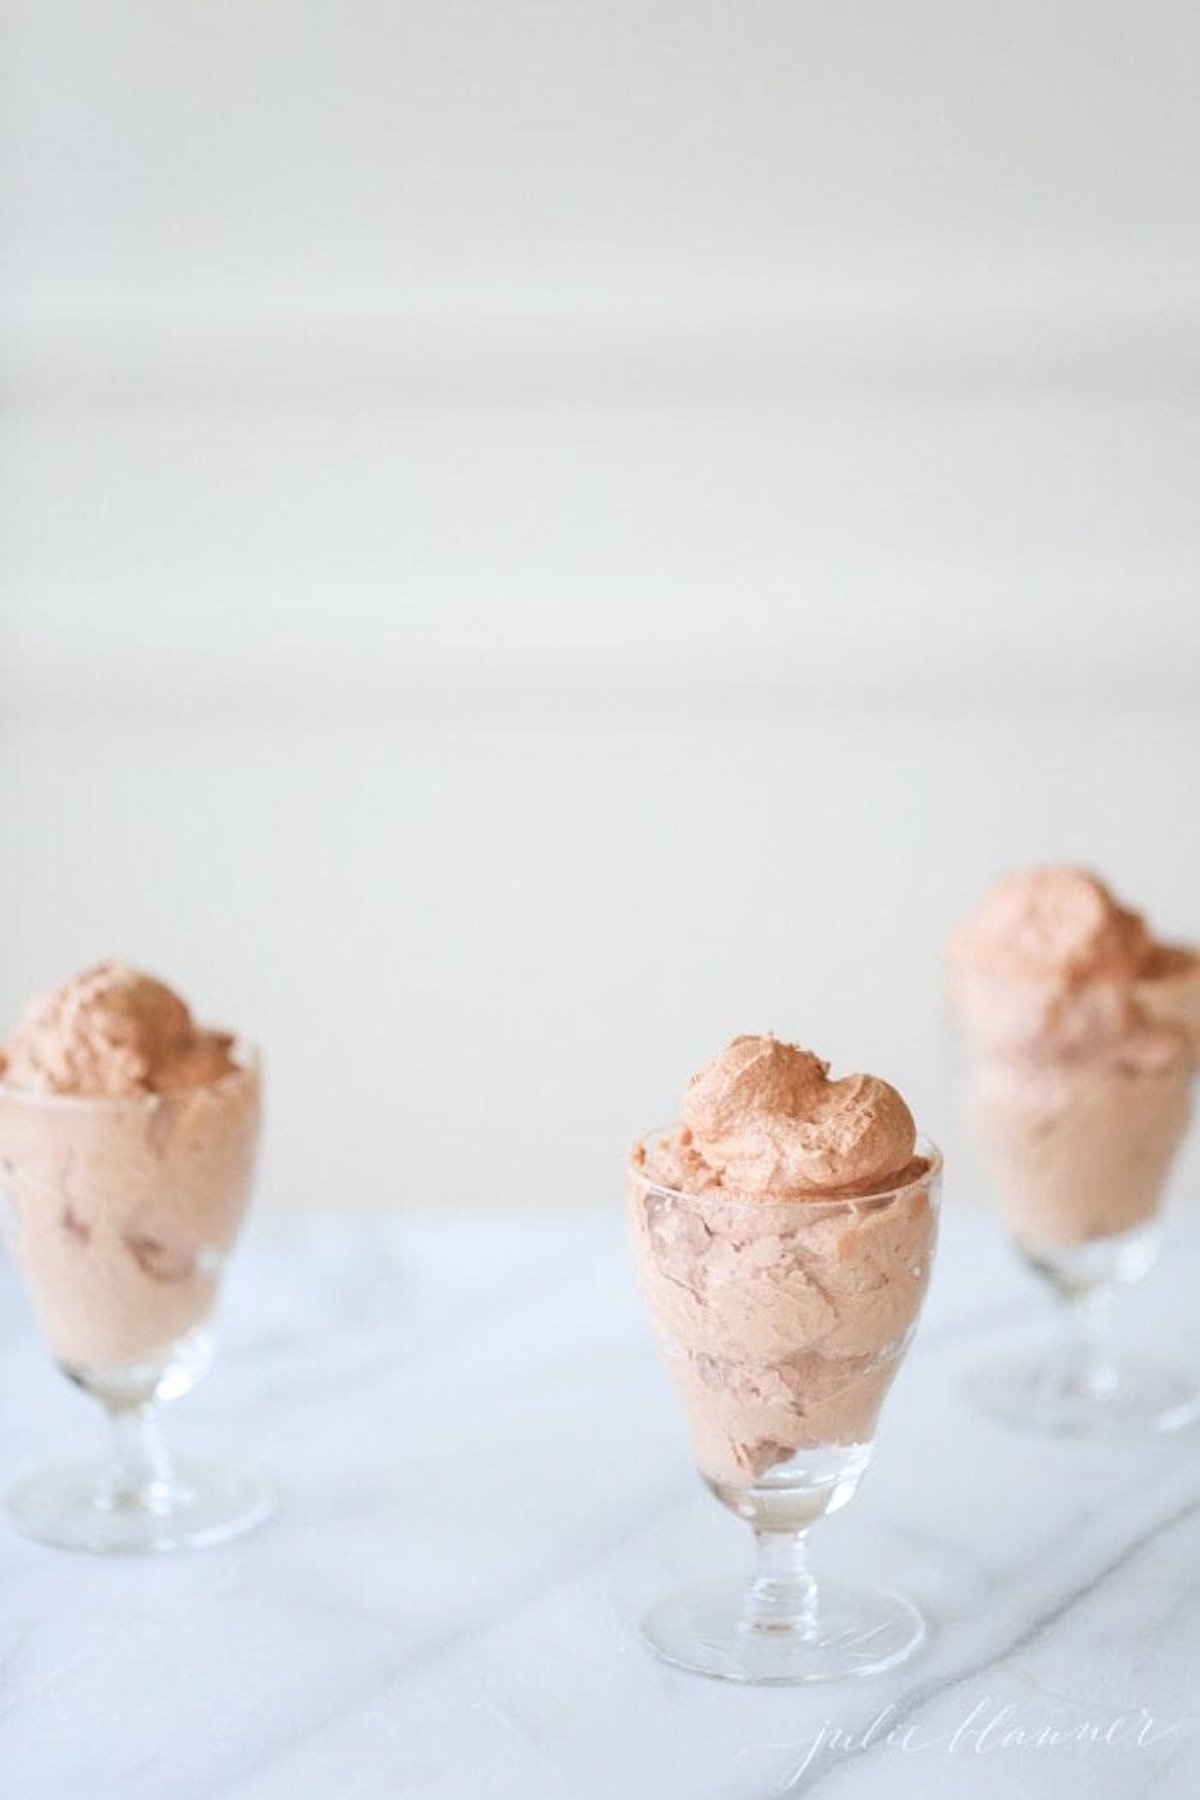 Easy chocolate mousse recipe served in glass cups on a marble table.